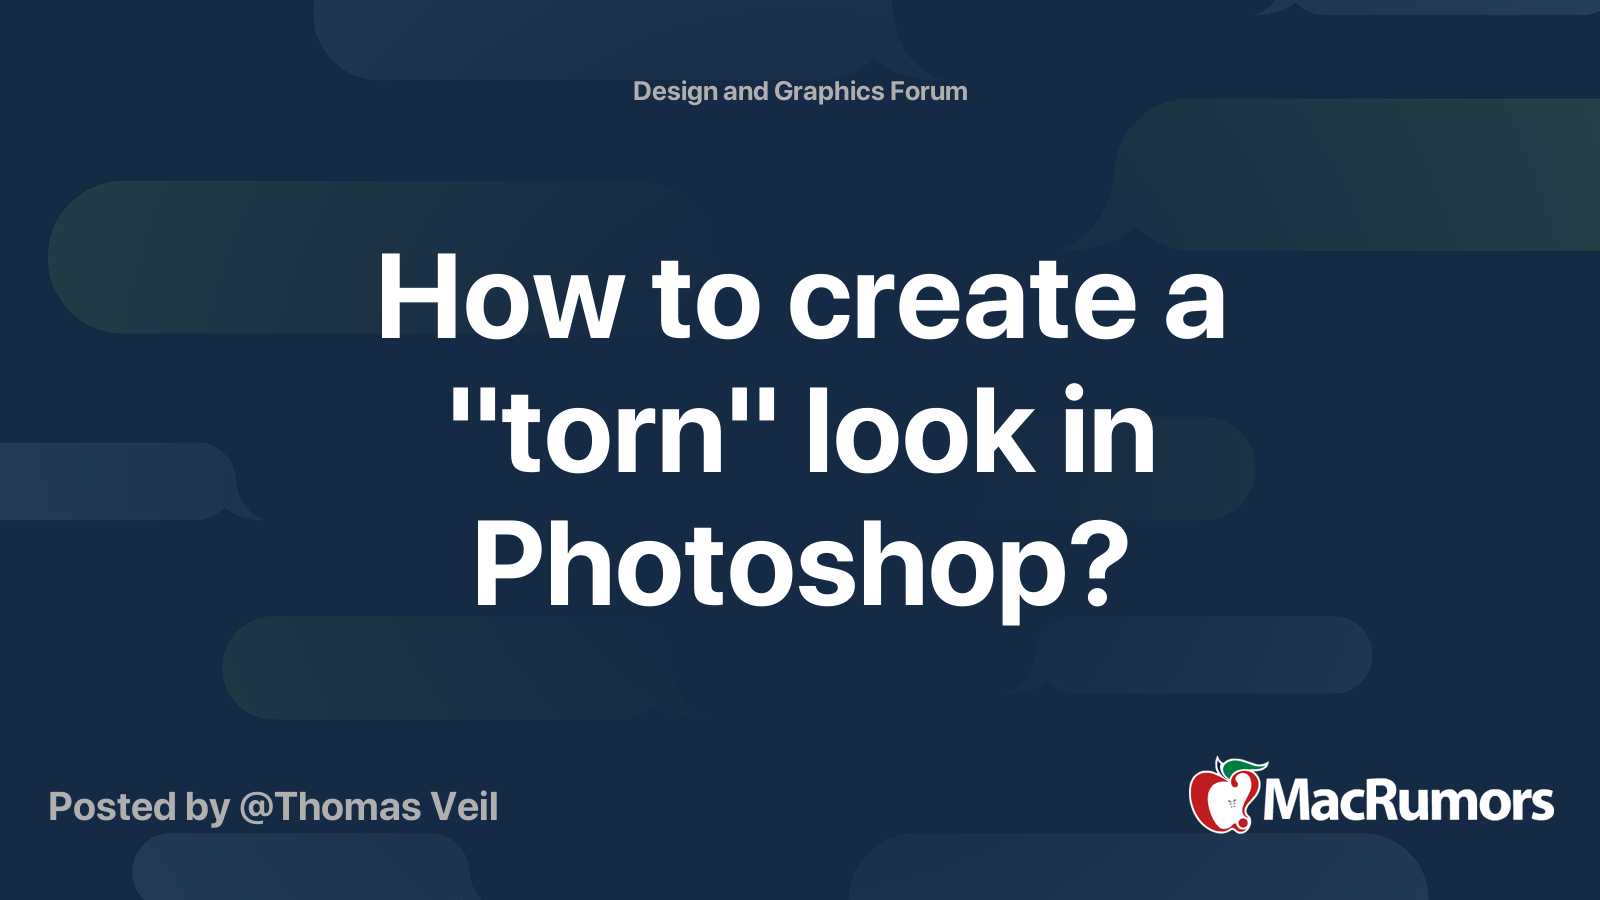 how-to-create-a-torn-look-in-photoshop-macrumors-forums